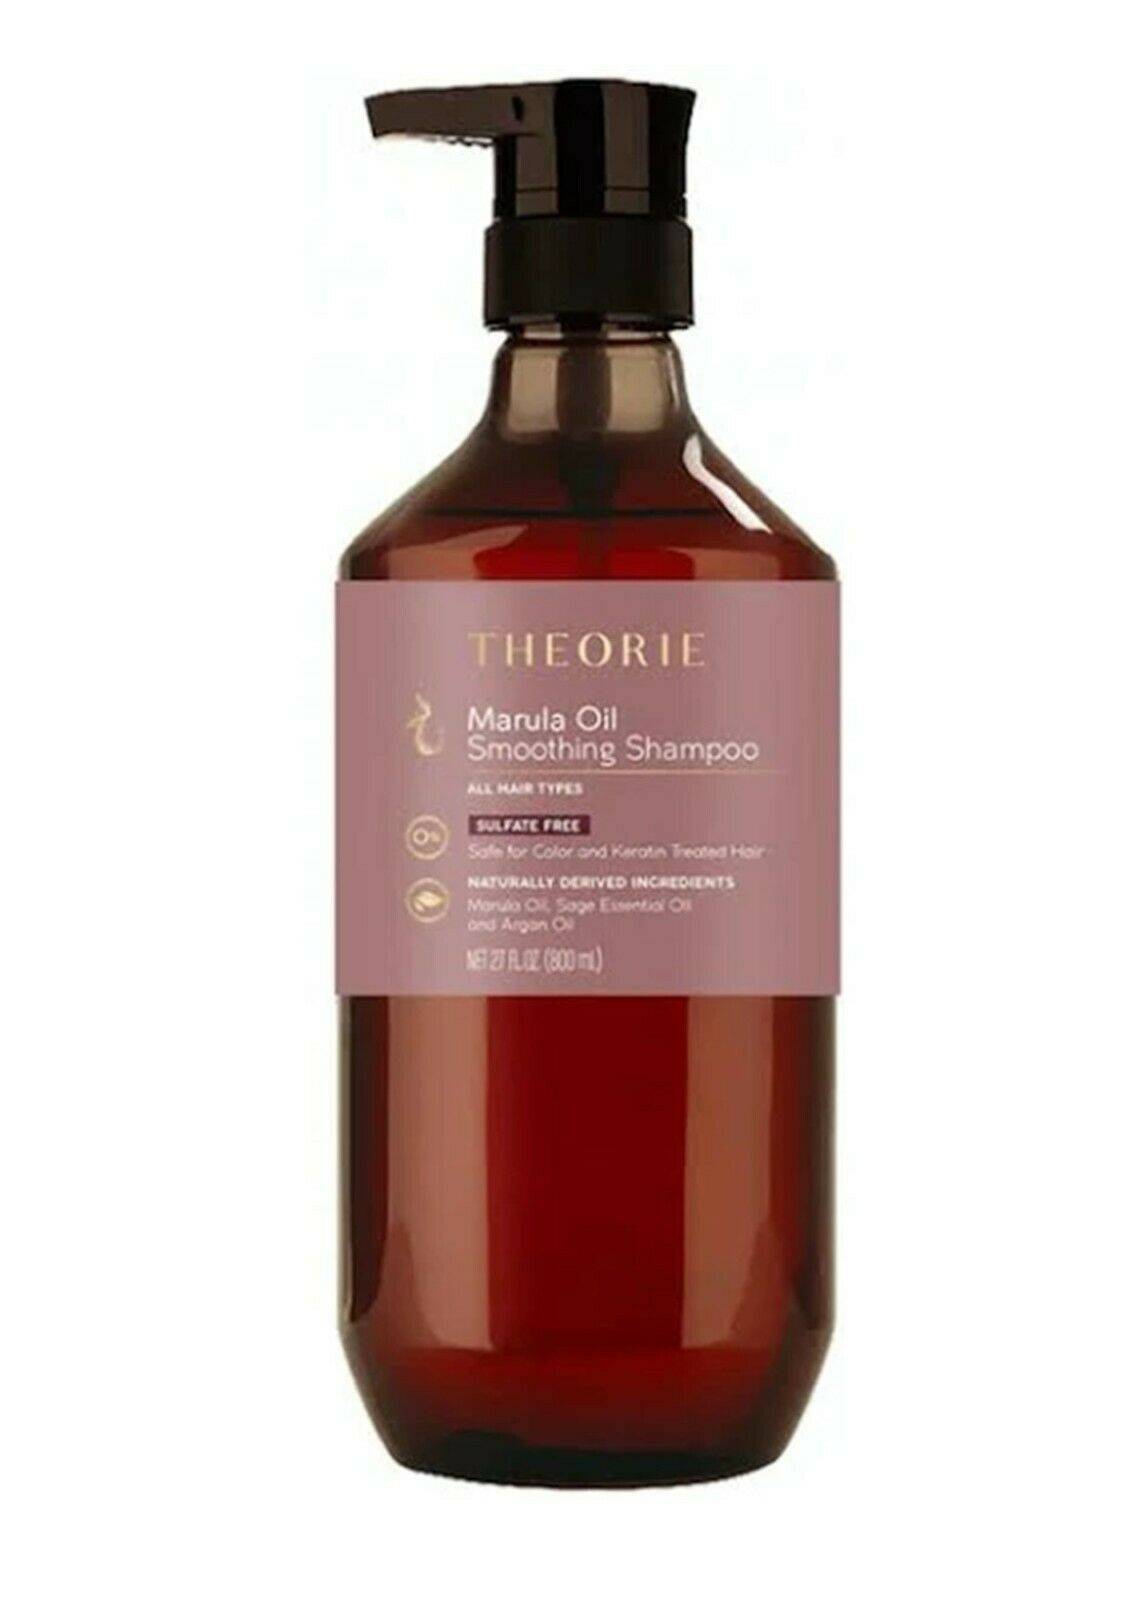 Theorie Marula Oil Smoothing Shampoo 800mL  Sulfate Free - On Line Hair Depot